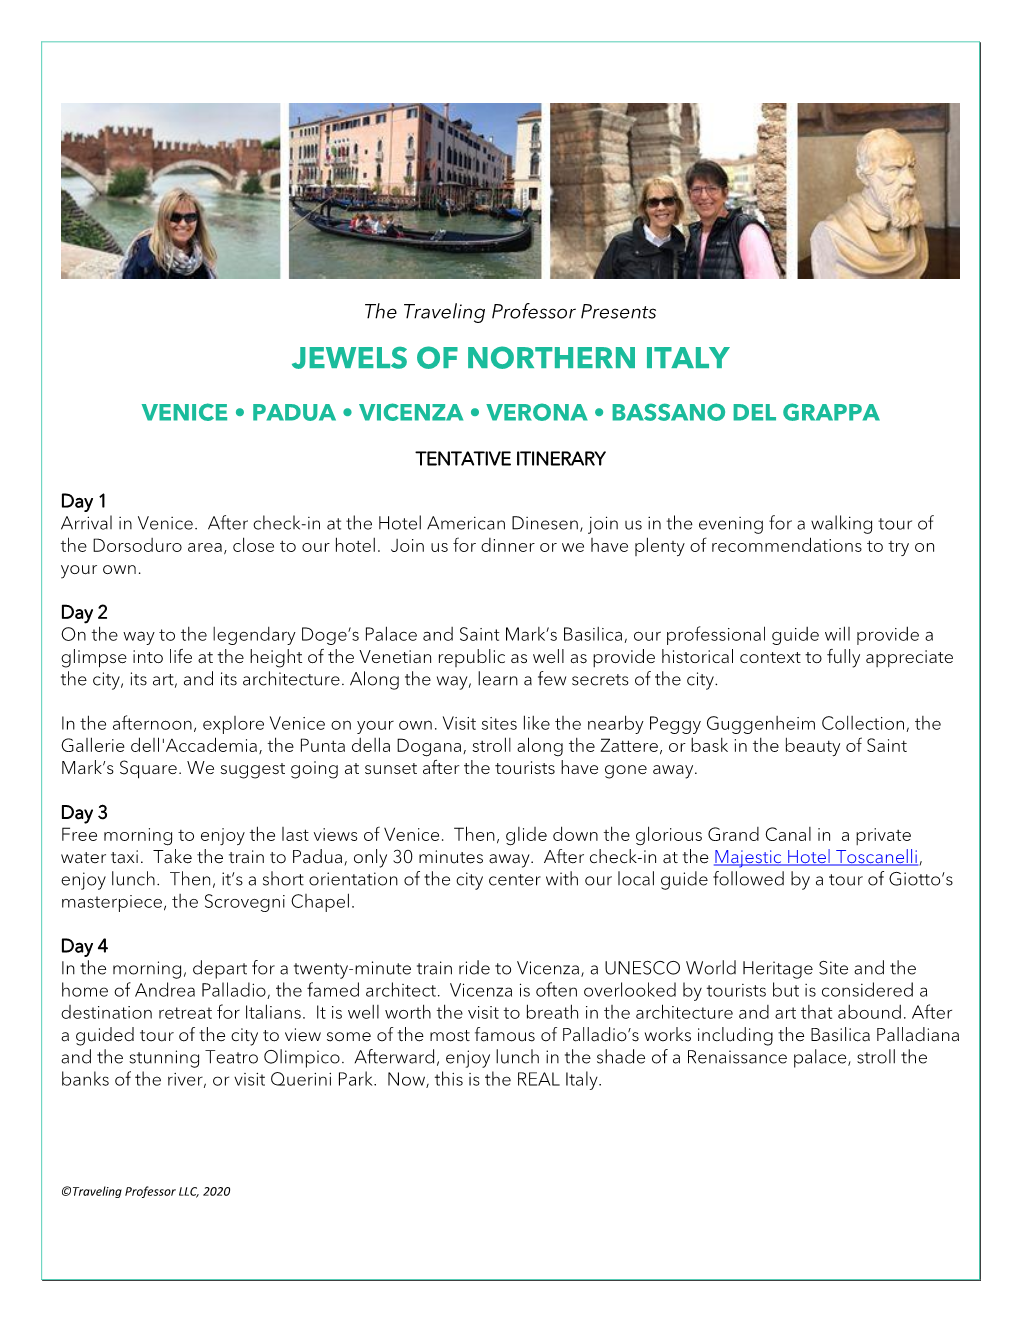 Jewels of Northern Italy